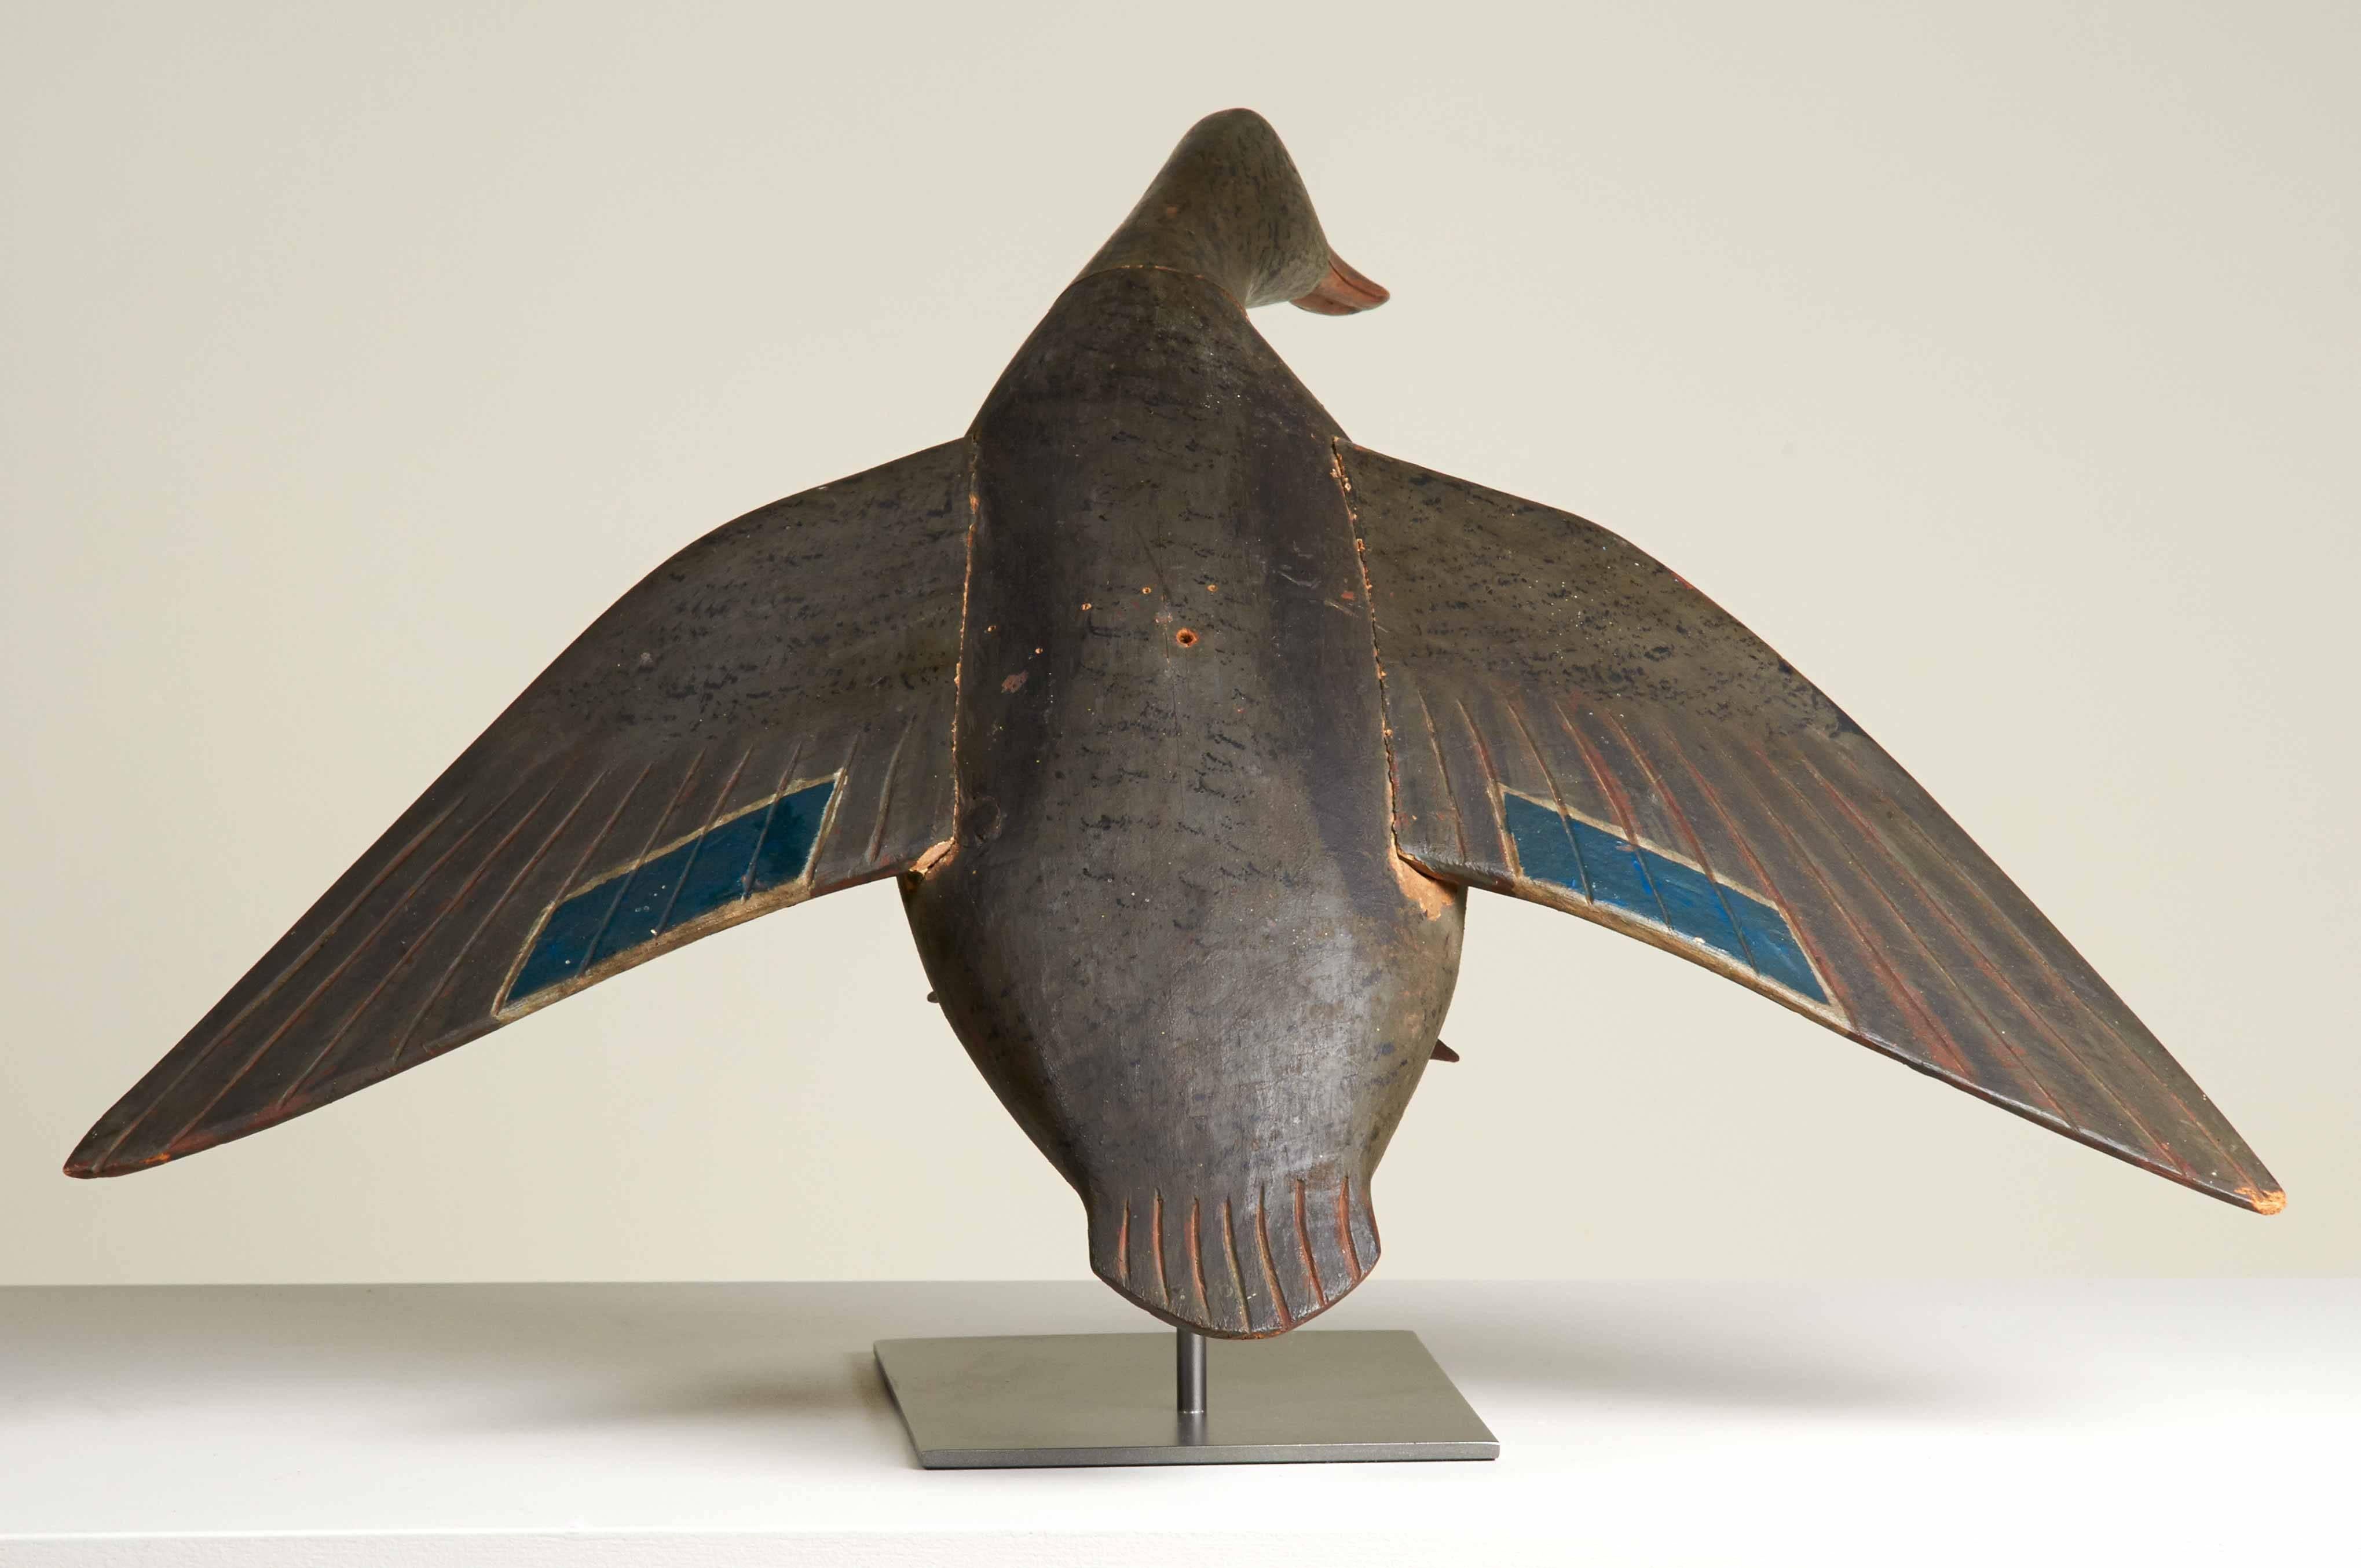 A carved and painted flying mallard decoy attributed to carver Augustus Aaron 'Gus' Wilson (1864-1950) of South Portland, Maine. This decoy was made to be hung as a decorative carving. 

Gus Wilson carved many of his decoys while working as the